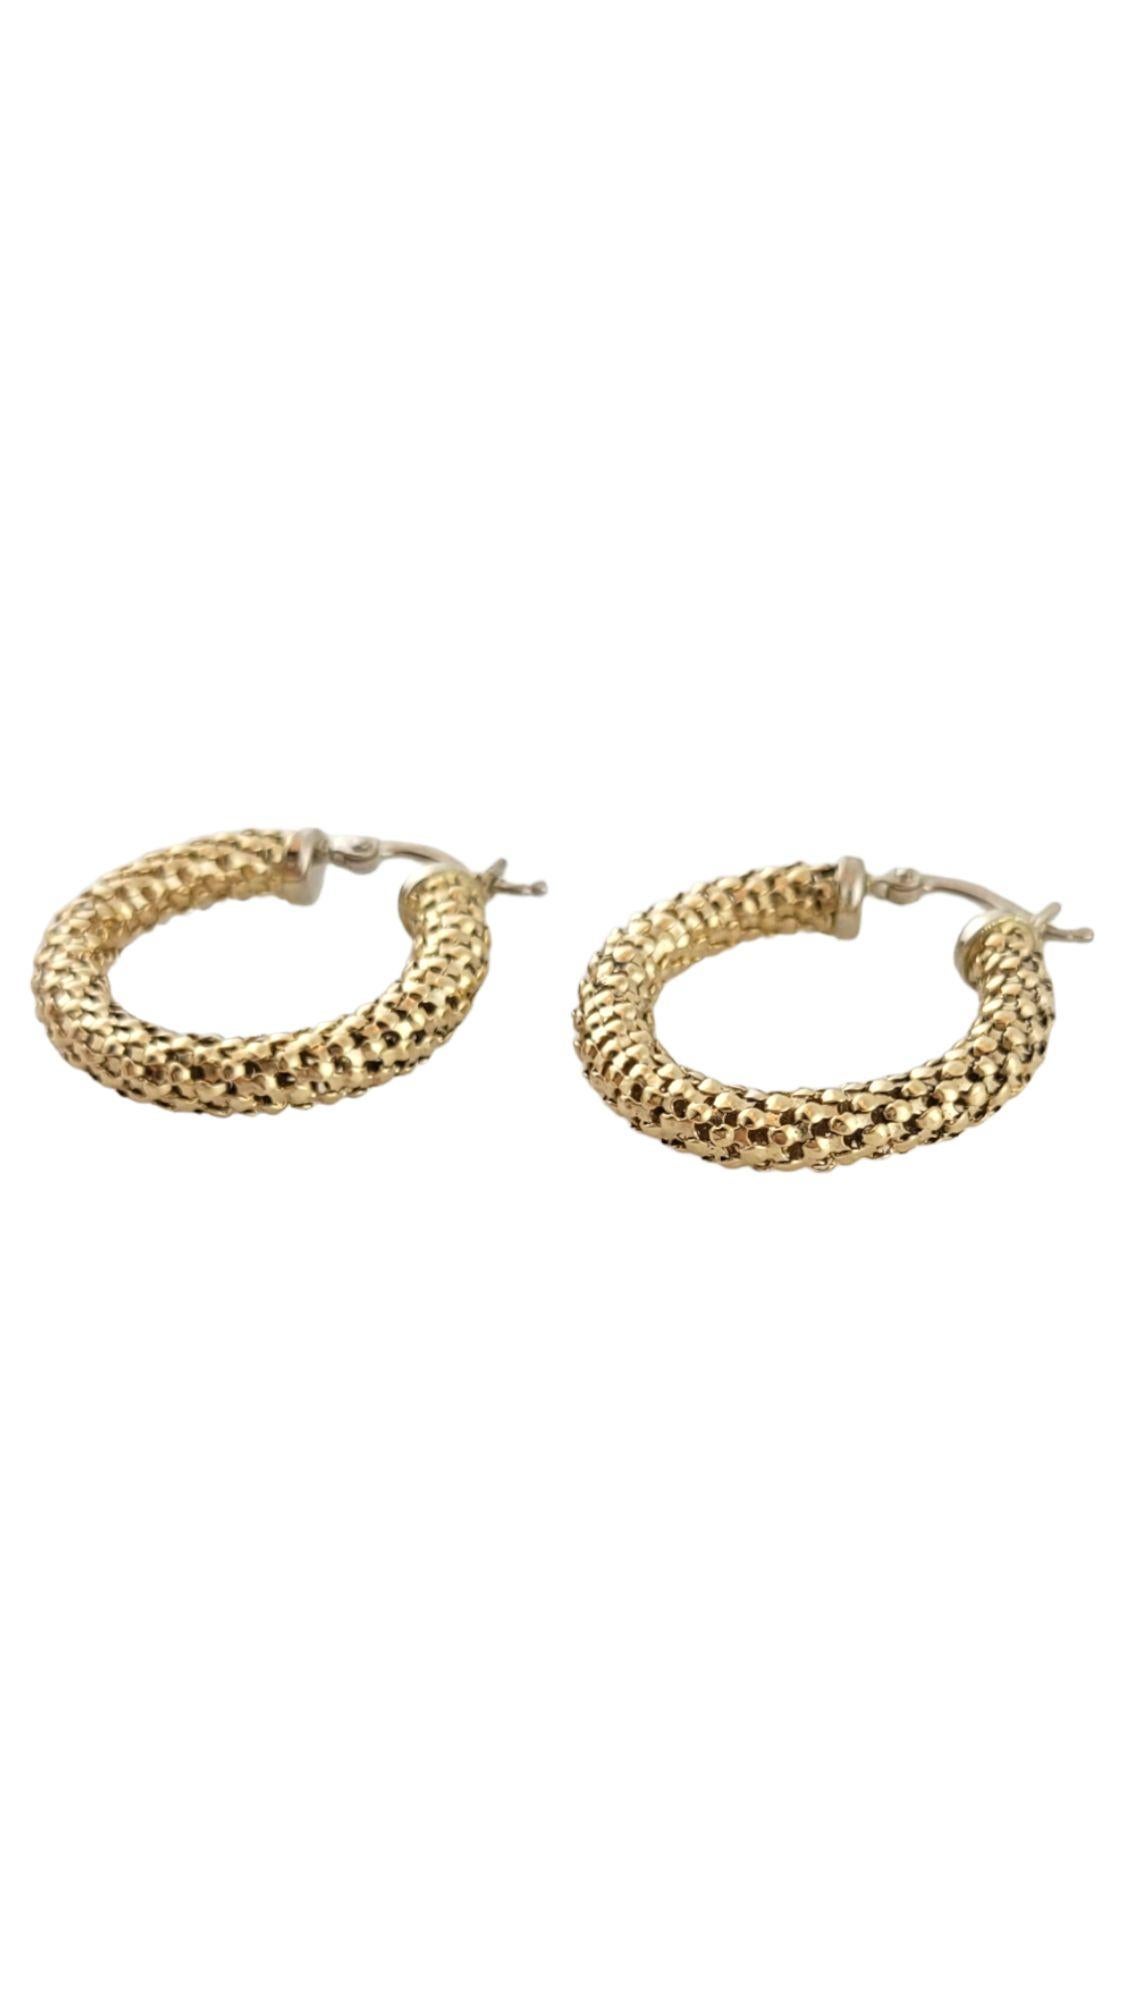 Vintage 14K Yellow Gold Textured Hoops

This gorgeous set of hoop earrings are textured to perfection!

Size: 26.8mm X 24mm X 4.1mm

Weight: 4.63 g/ 3.0 dwt

Hallmark: 14K ITALY

Very good condition, professionally polished.

Will come packaged in a